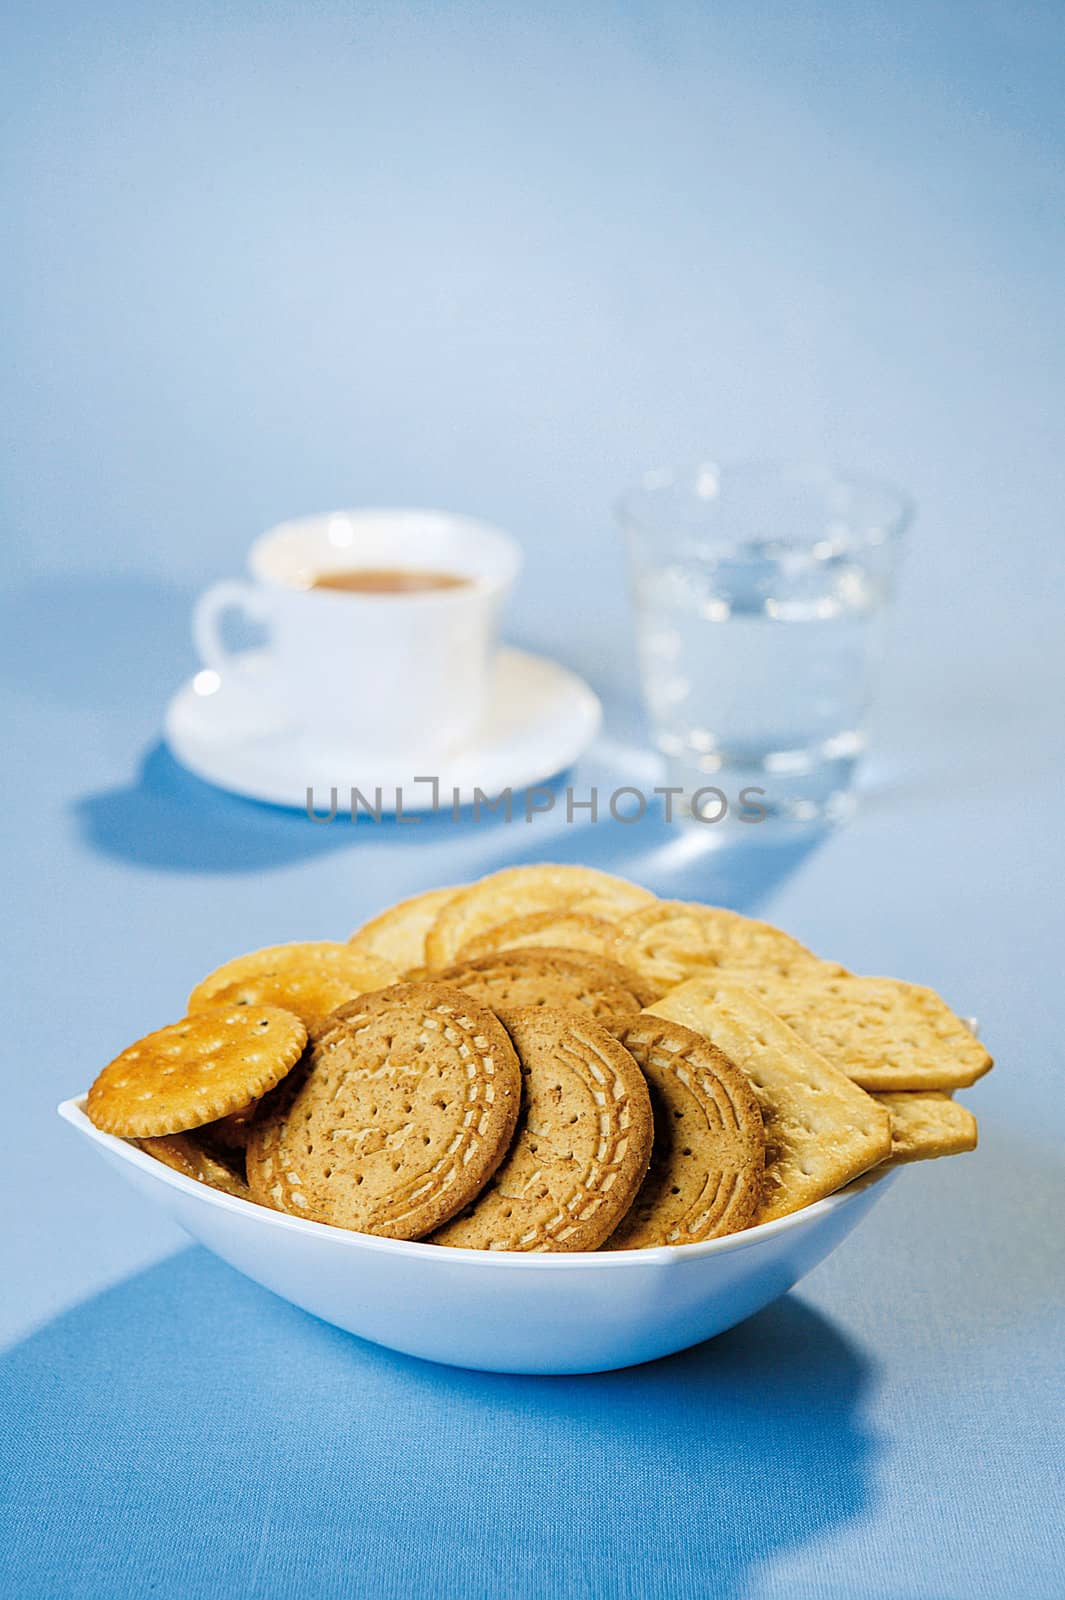 Crackers, coffee and water on a blue table